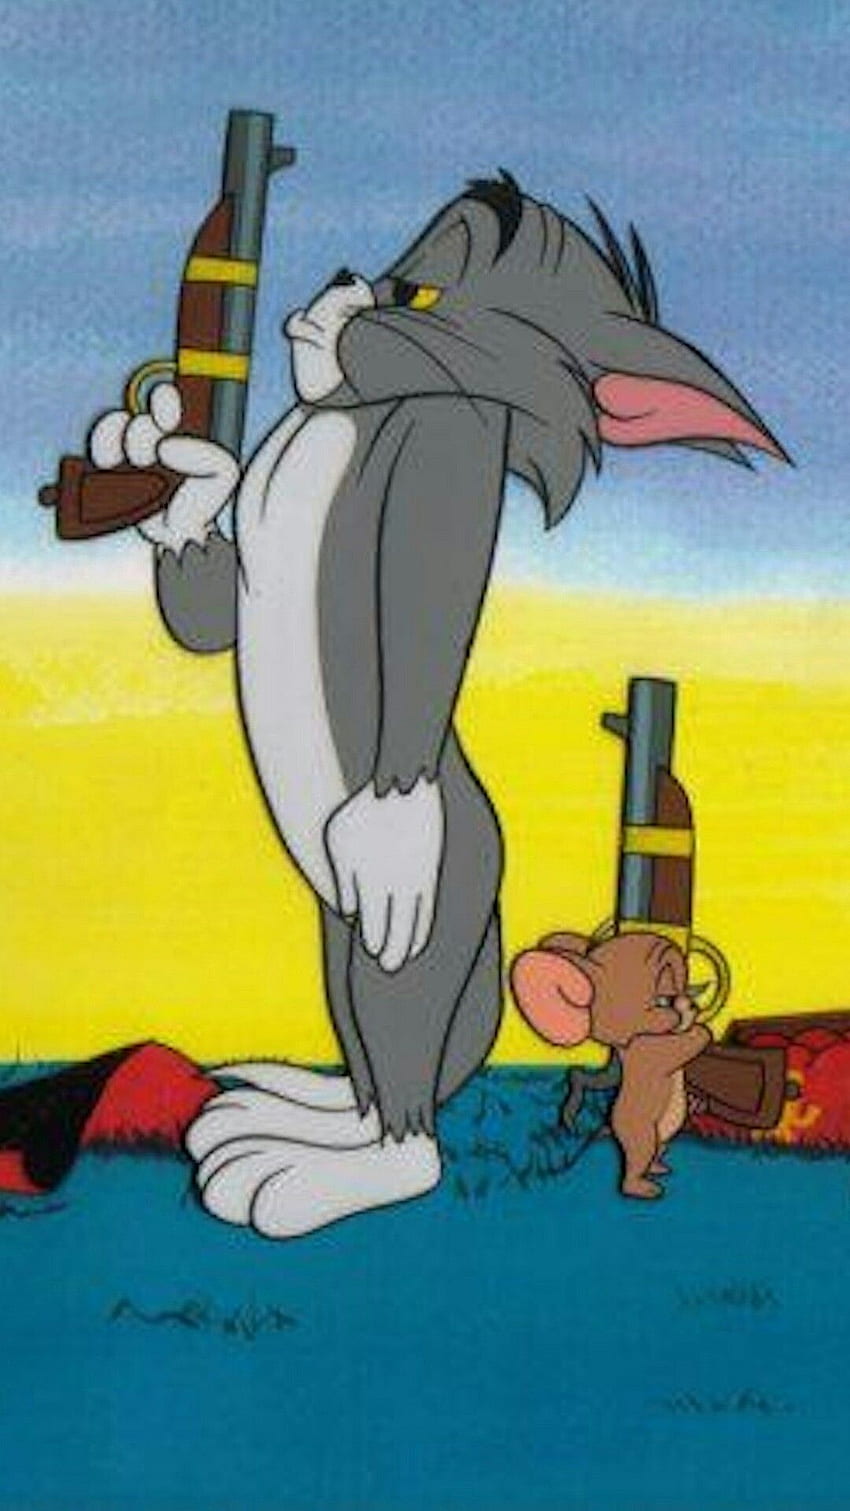 Tom and jerry cartoon person - Tom and Jerry